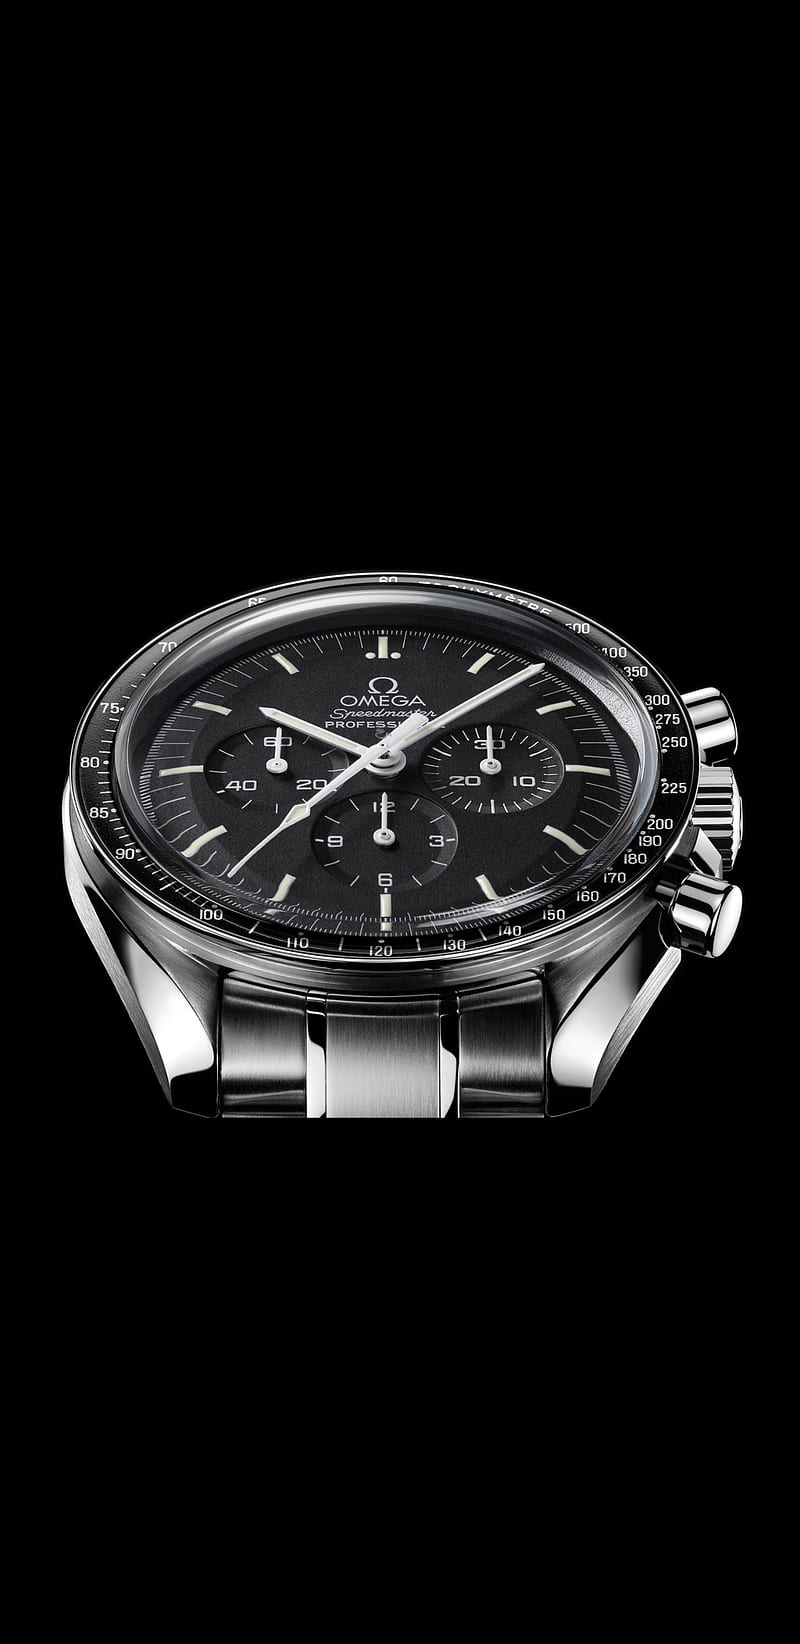 OMEGA Watches 1080P 2K 4K 5K HD wallpapers free download  Wallpaper  Flare